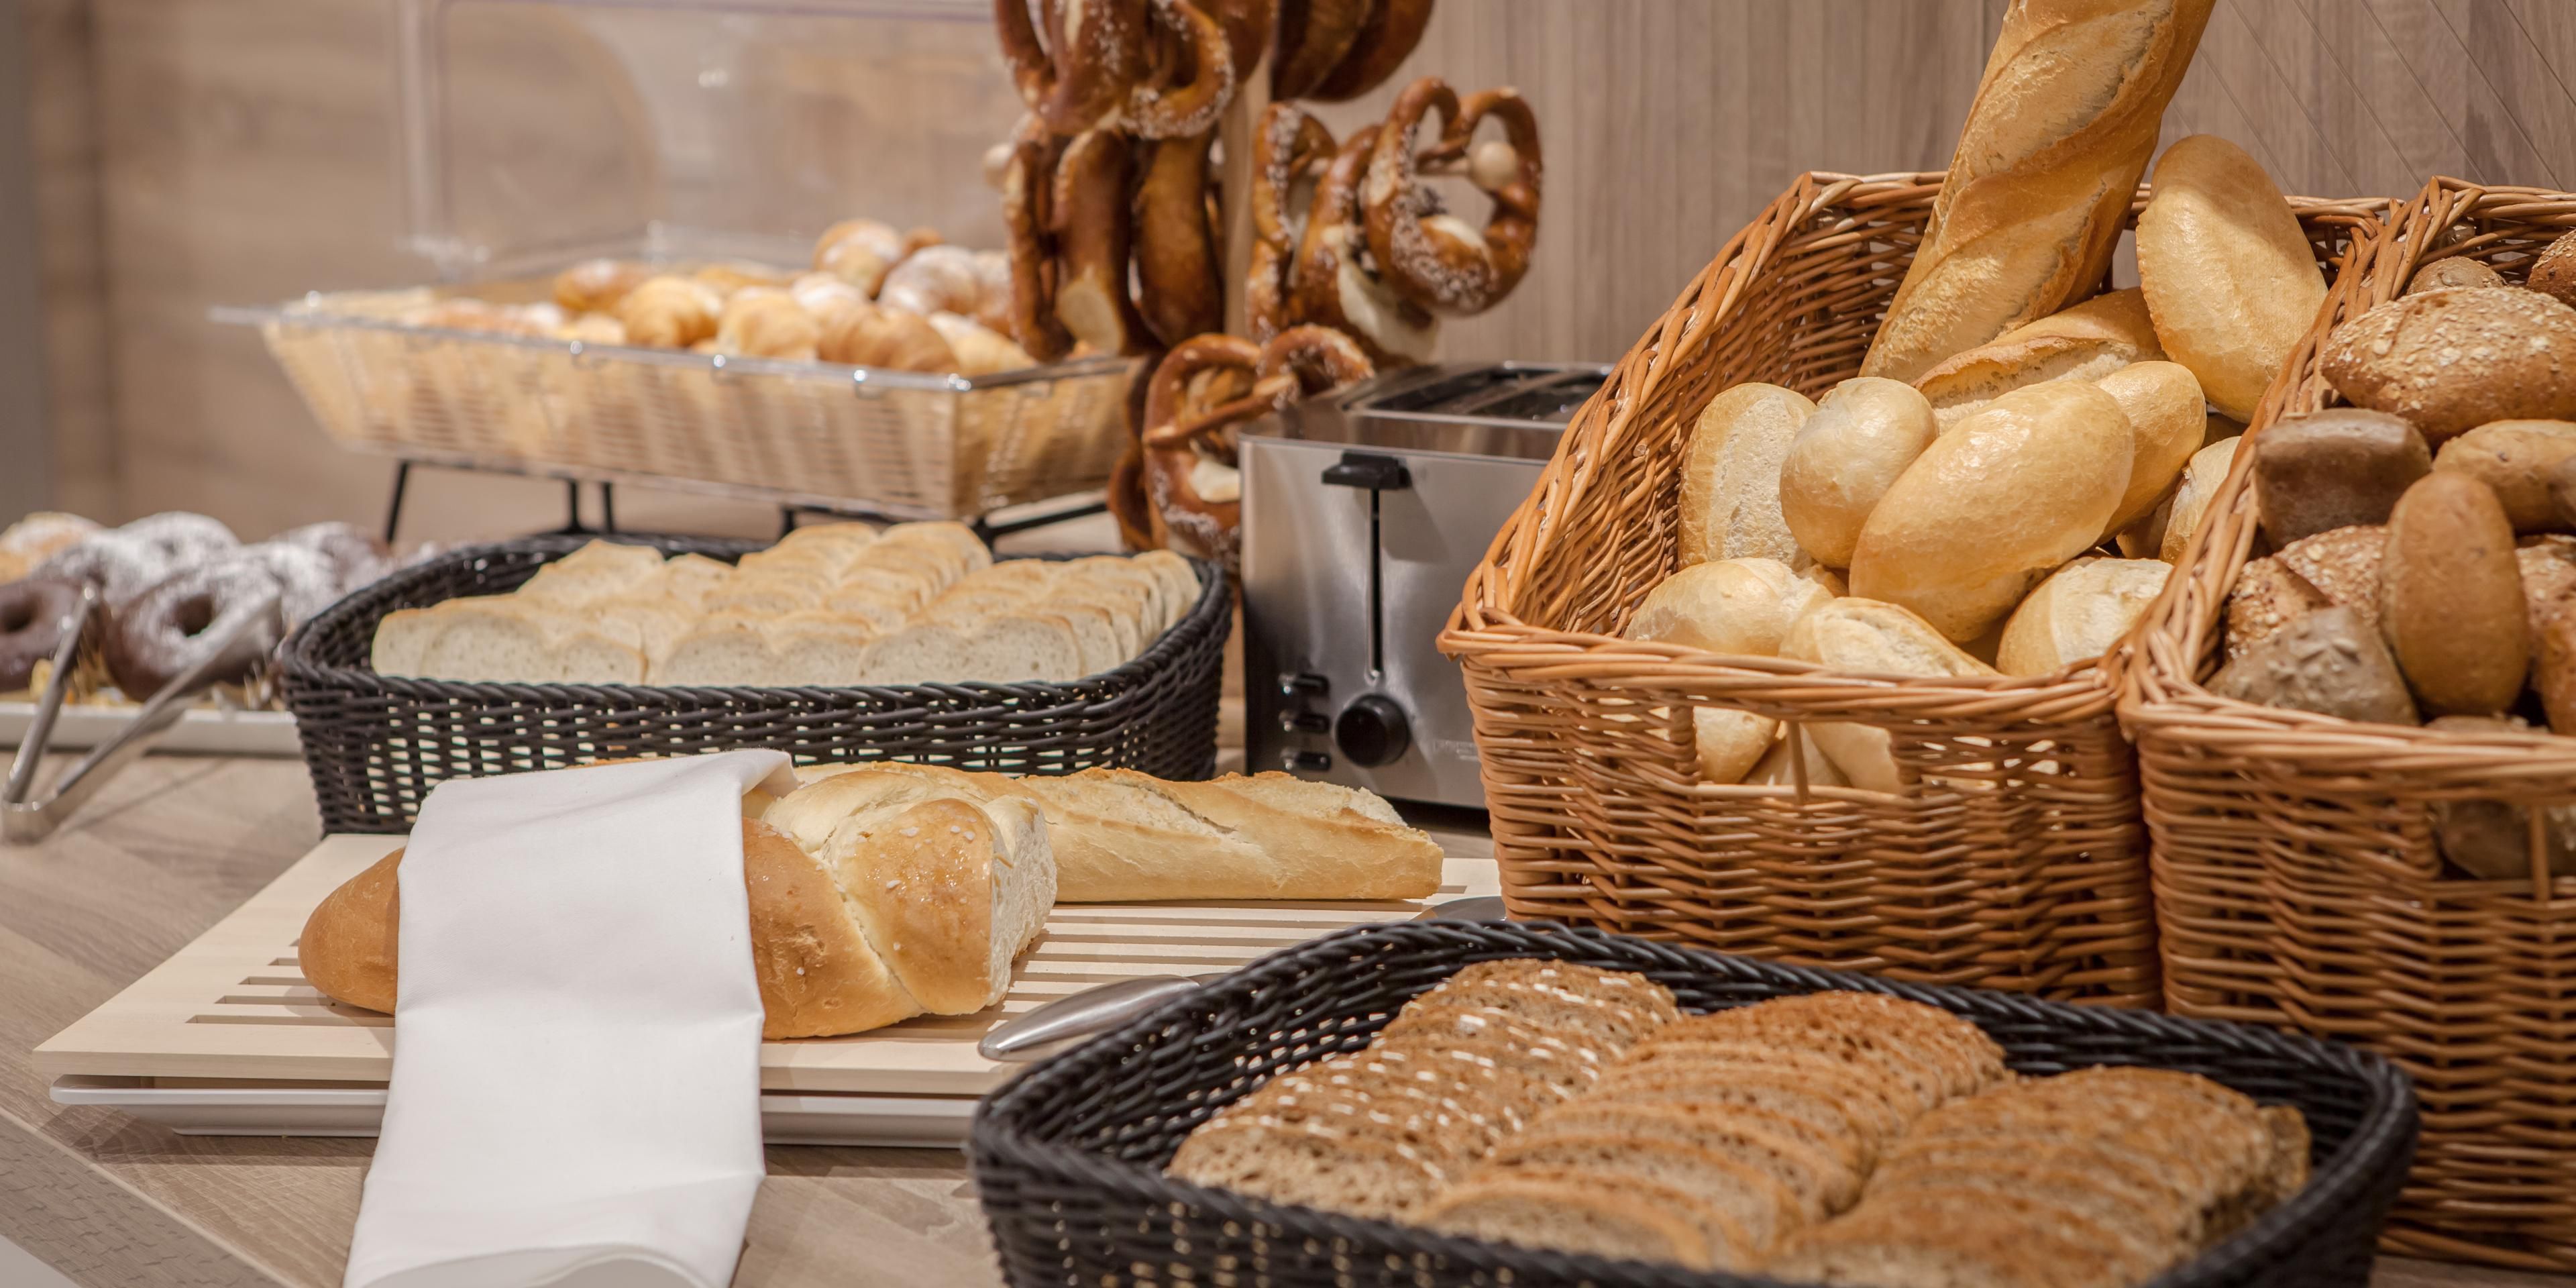 Freshly baked bread and rolls to be enjoyed at breakfast. 